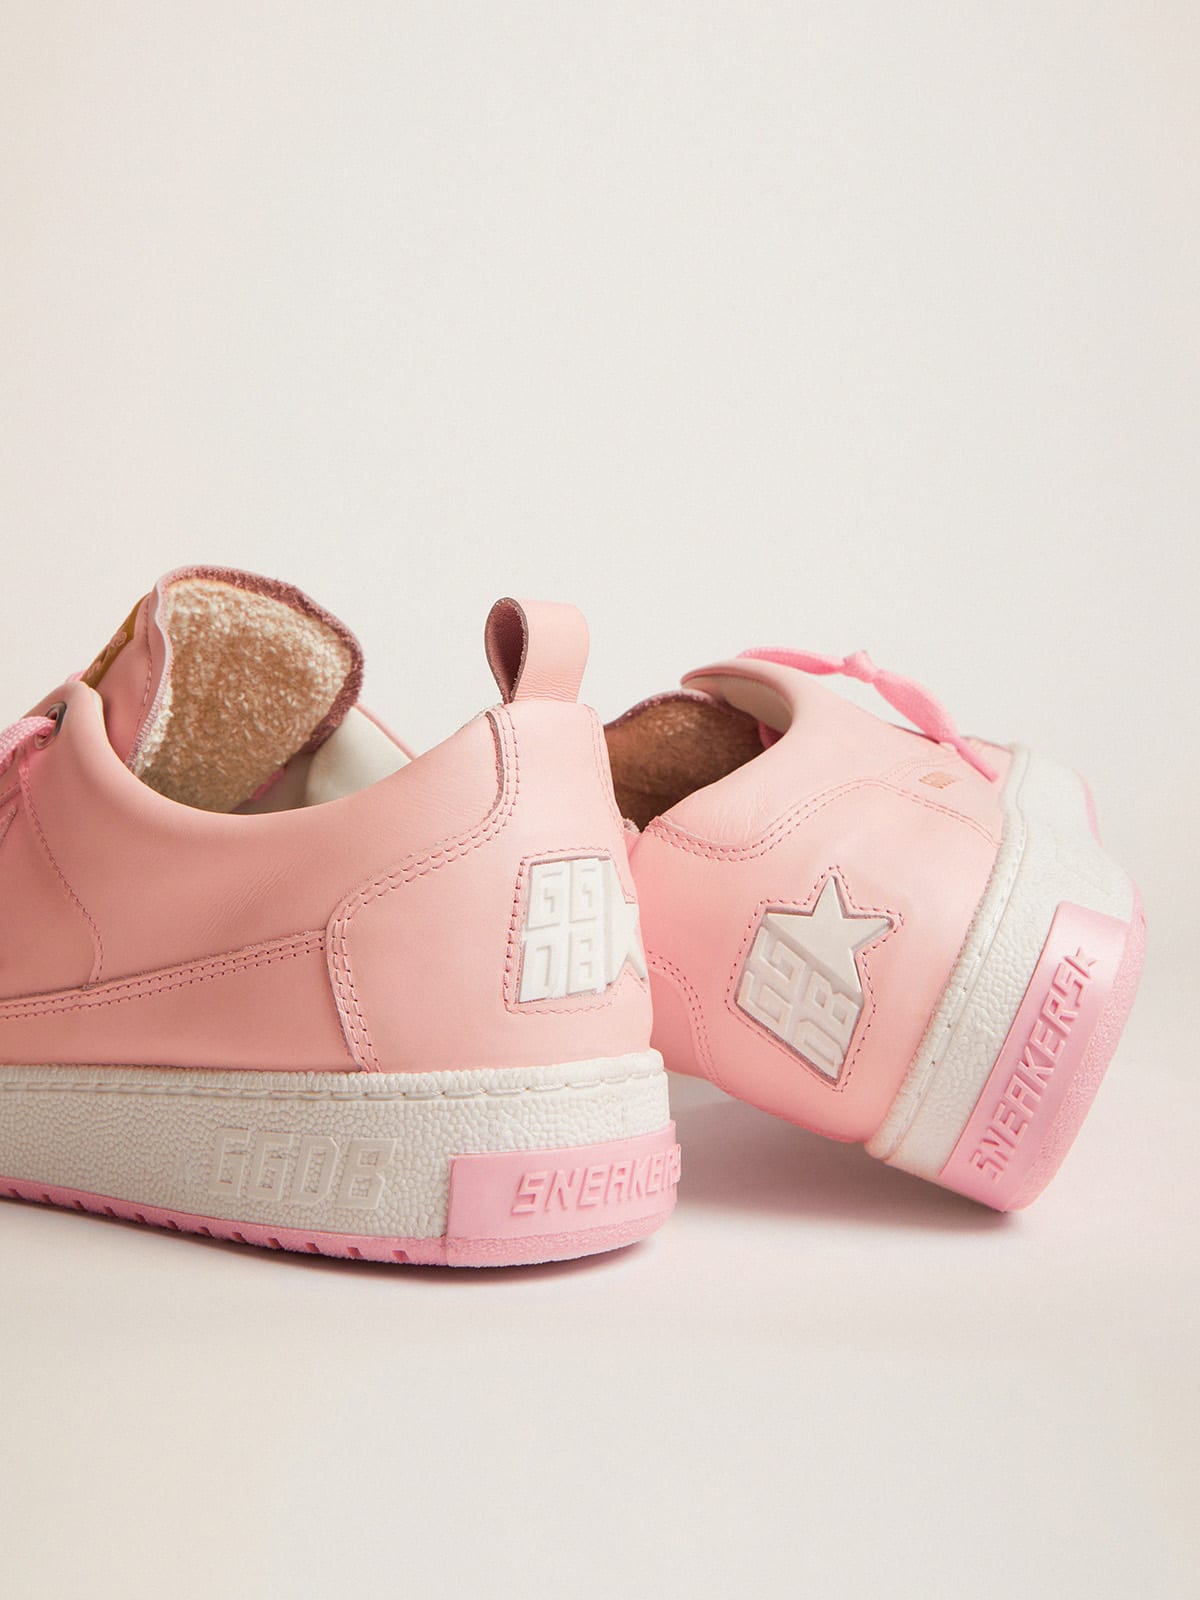 Women\'s Yeah sneakers in pale pink leather | Golden Goose